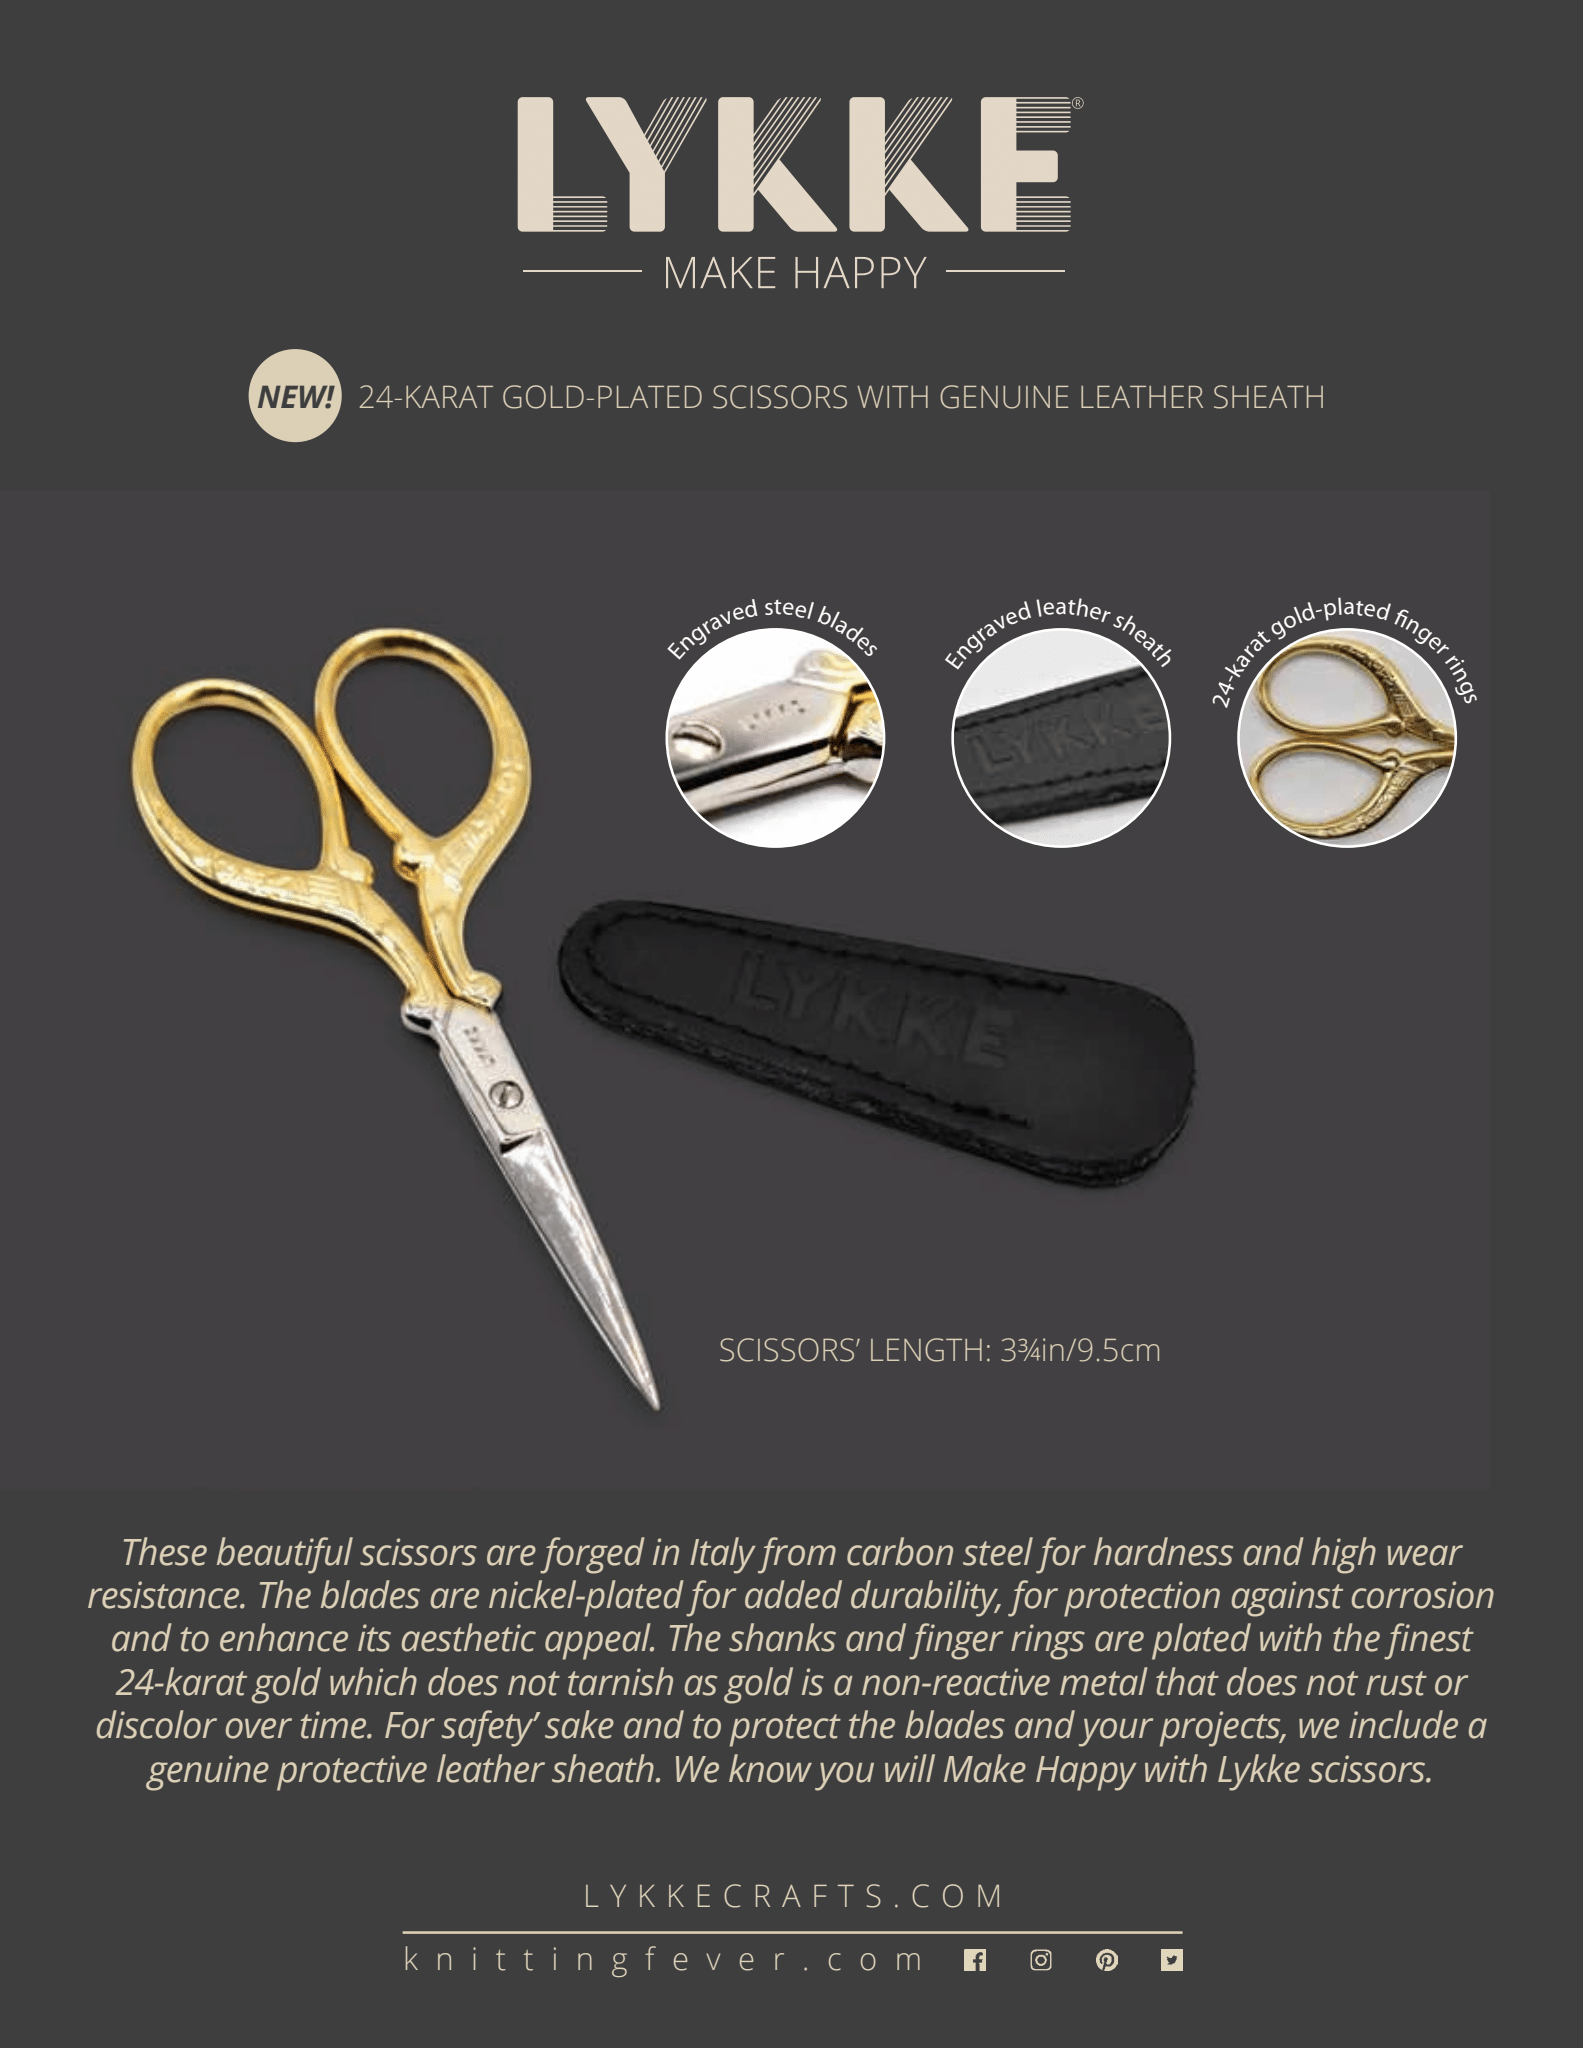 LYKKE GOLD-PLATED EMBROIDERY SCISSORS